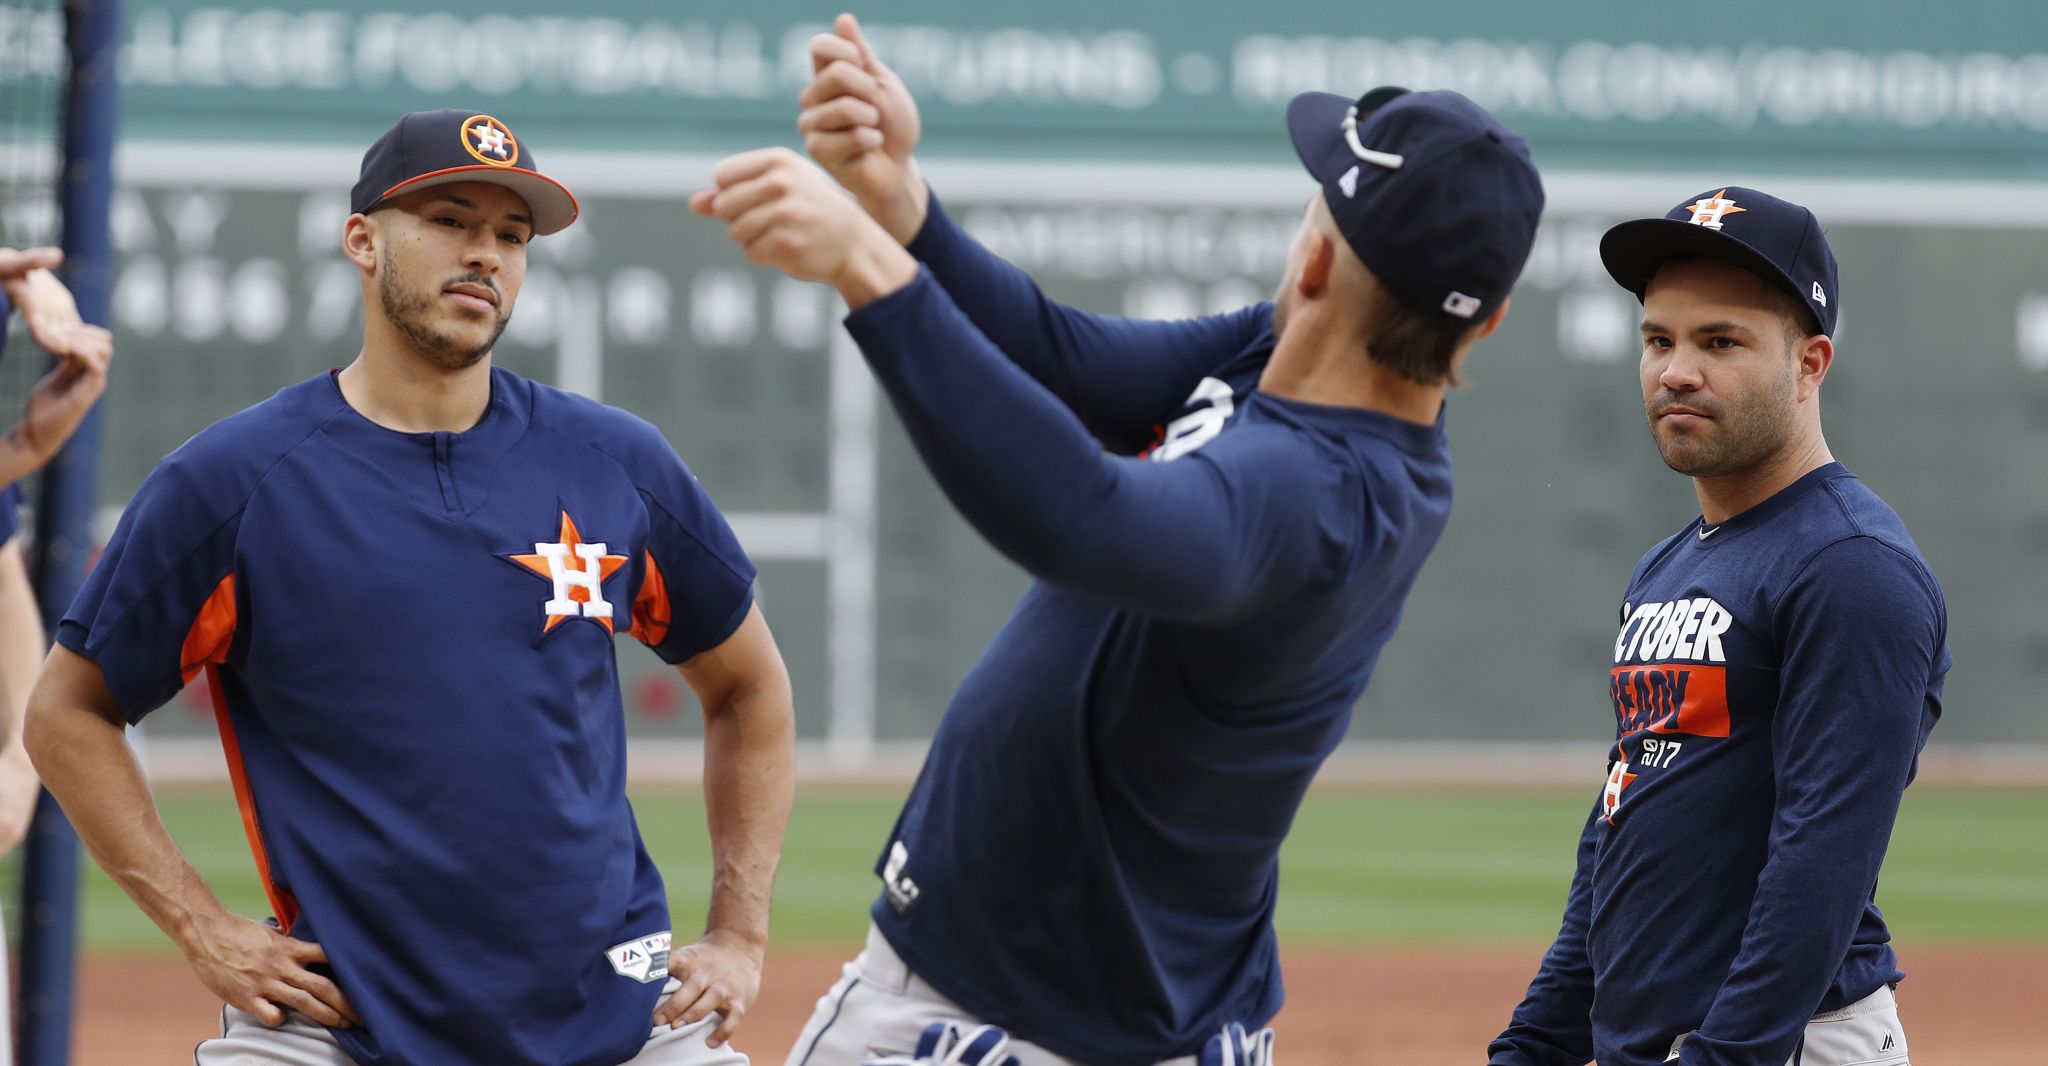 Charlie Morton and George Springer, both state bred Major Leaguers, are  turning the Houston Astros into “Connecticut's Team”